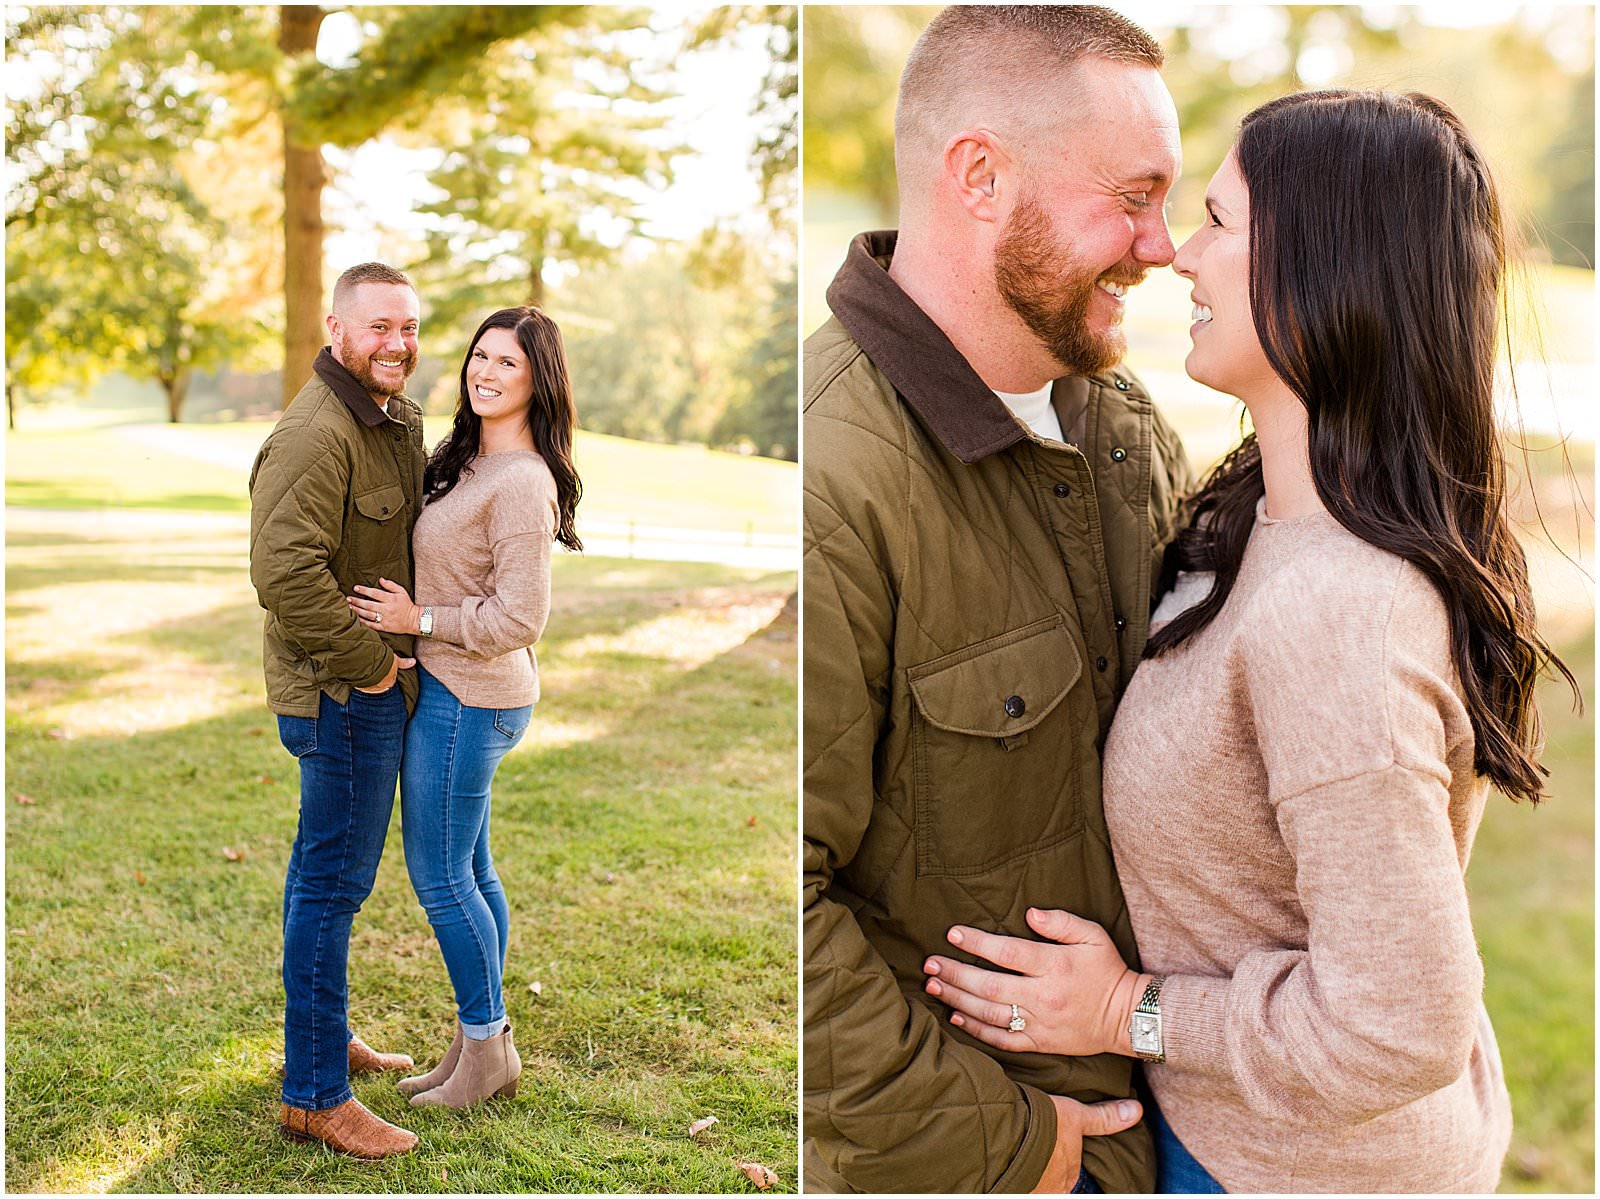 A Rolling Hills Country Club Engagement Session | Meagan and Kyle | Bret and Brandie Photography 0006.jpg